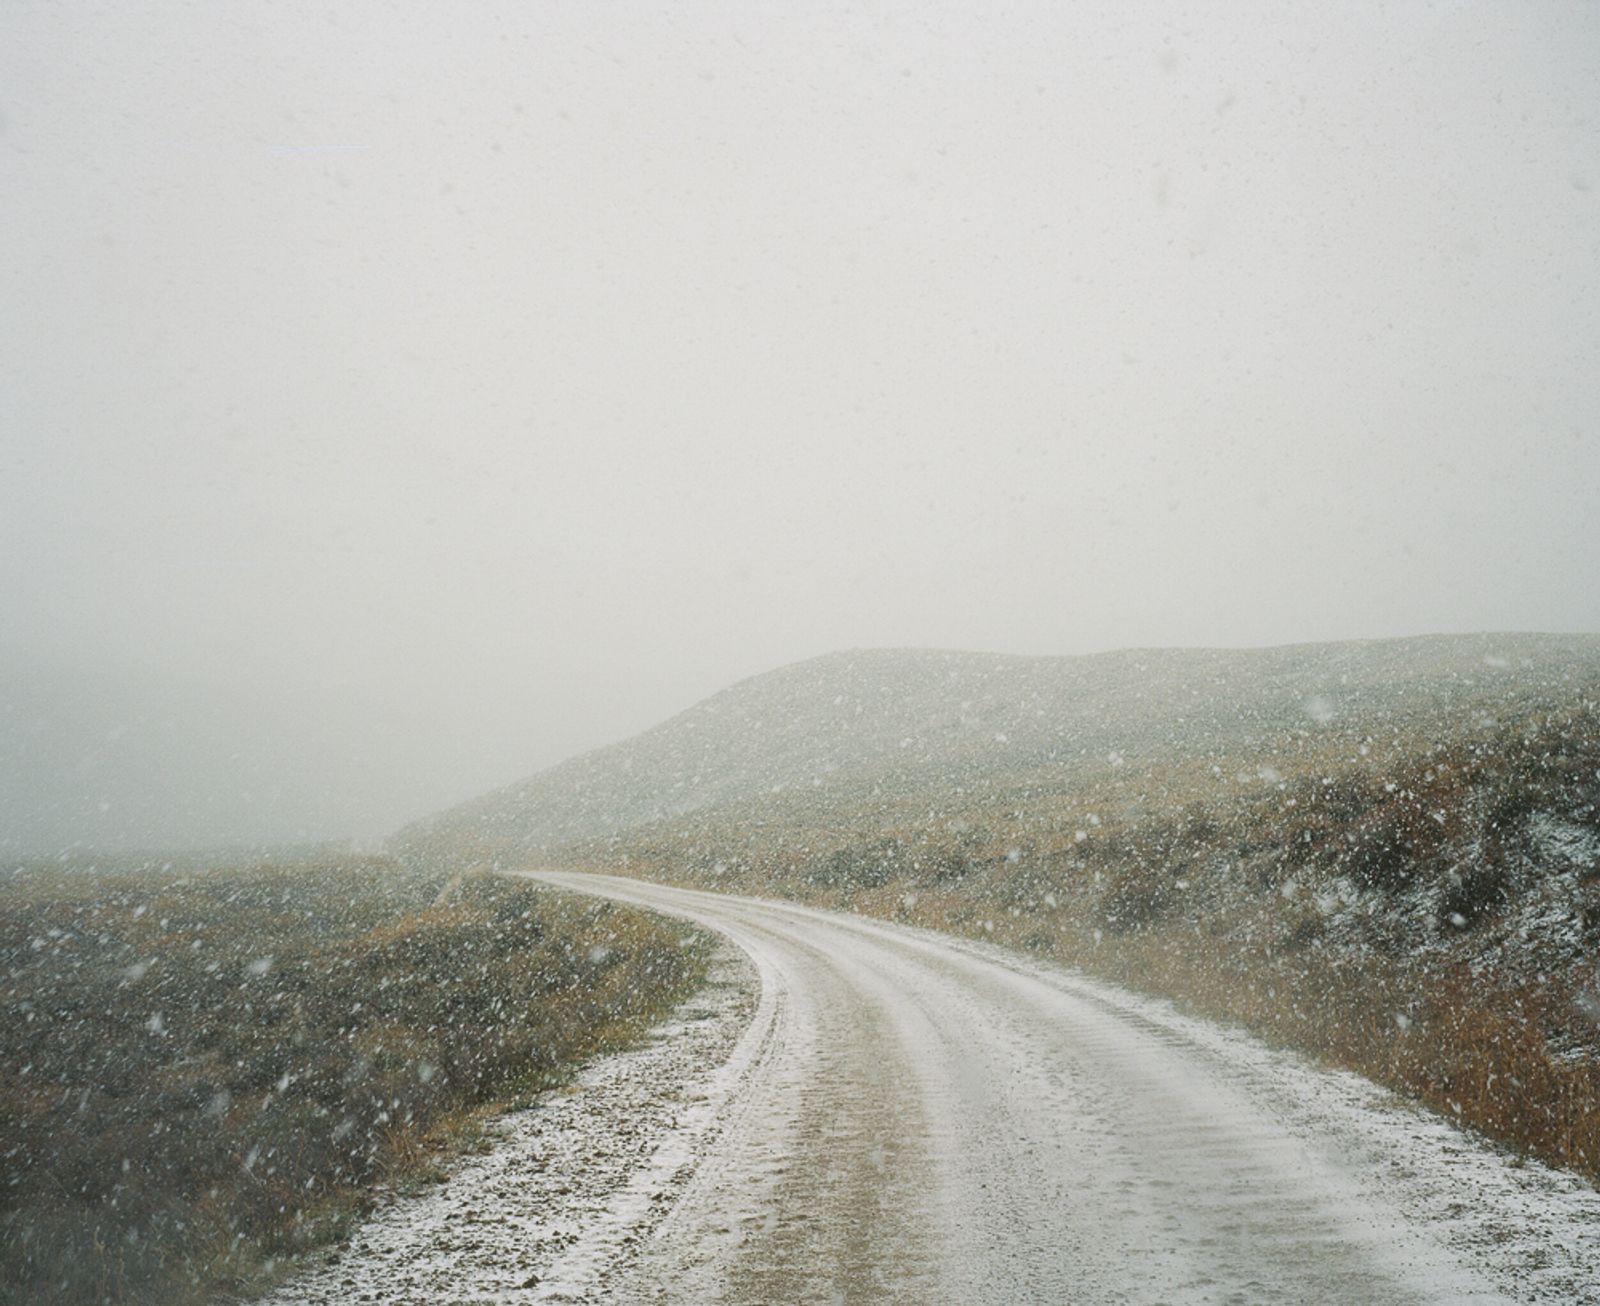 © Katrina D'autremont - Image from the The Other Mountain photography project